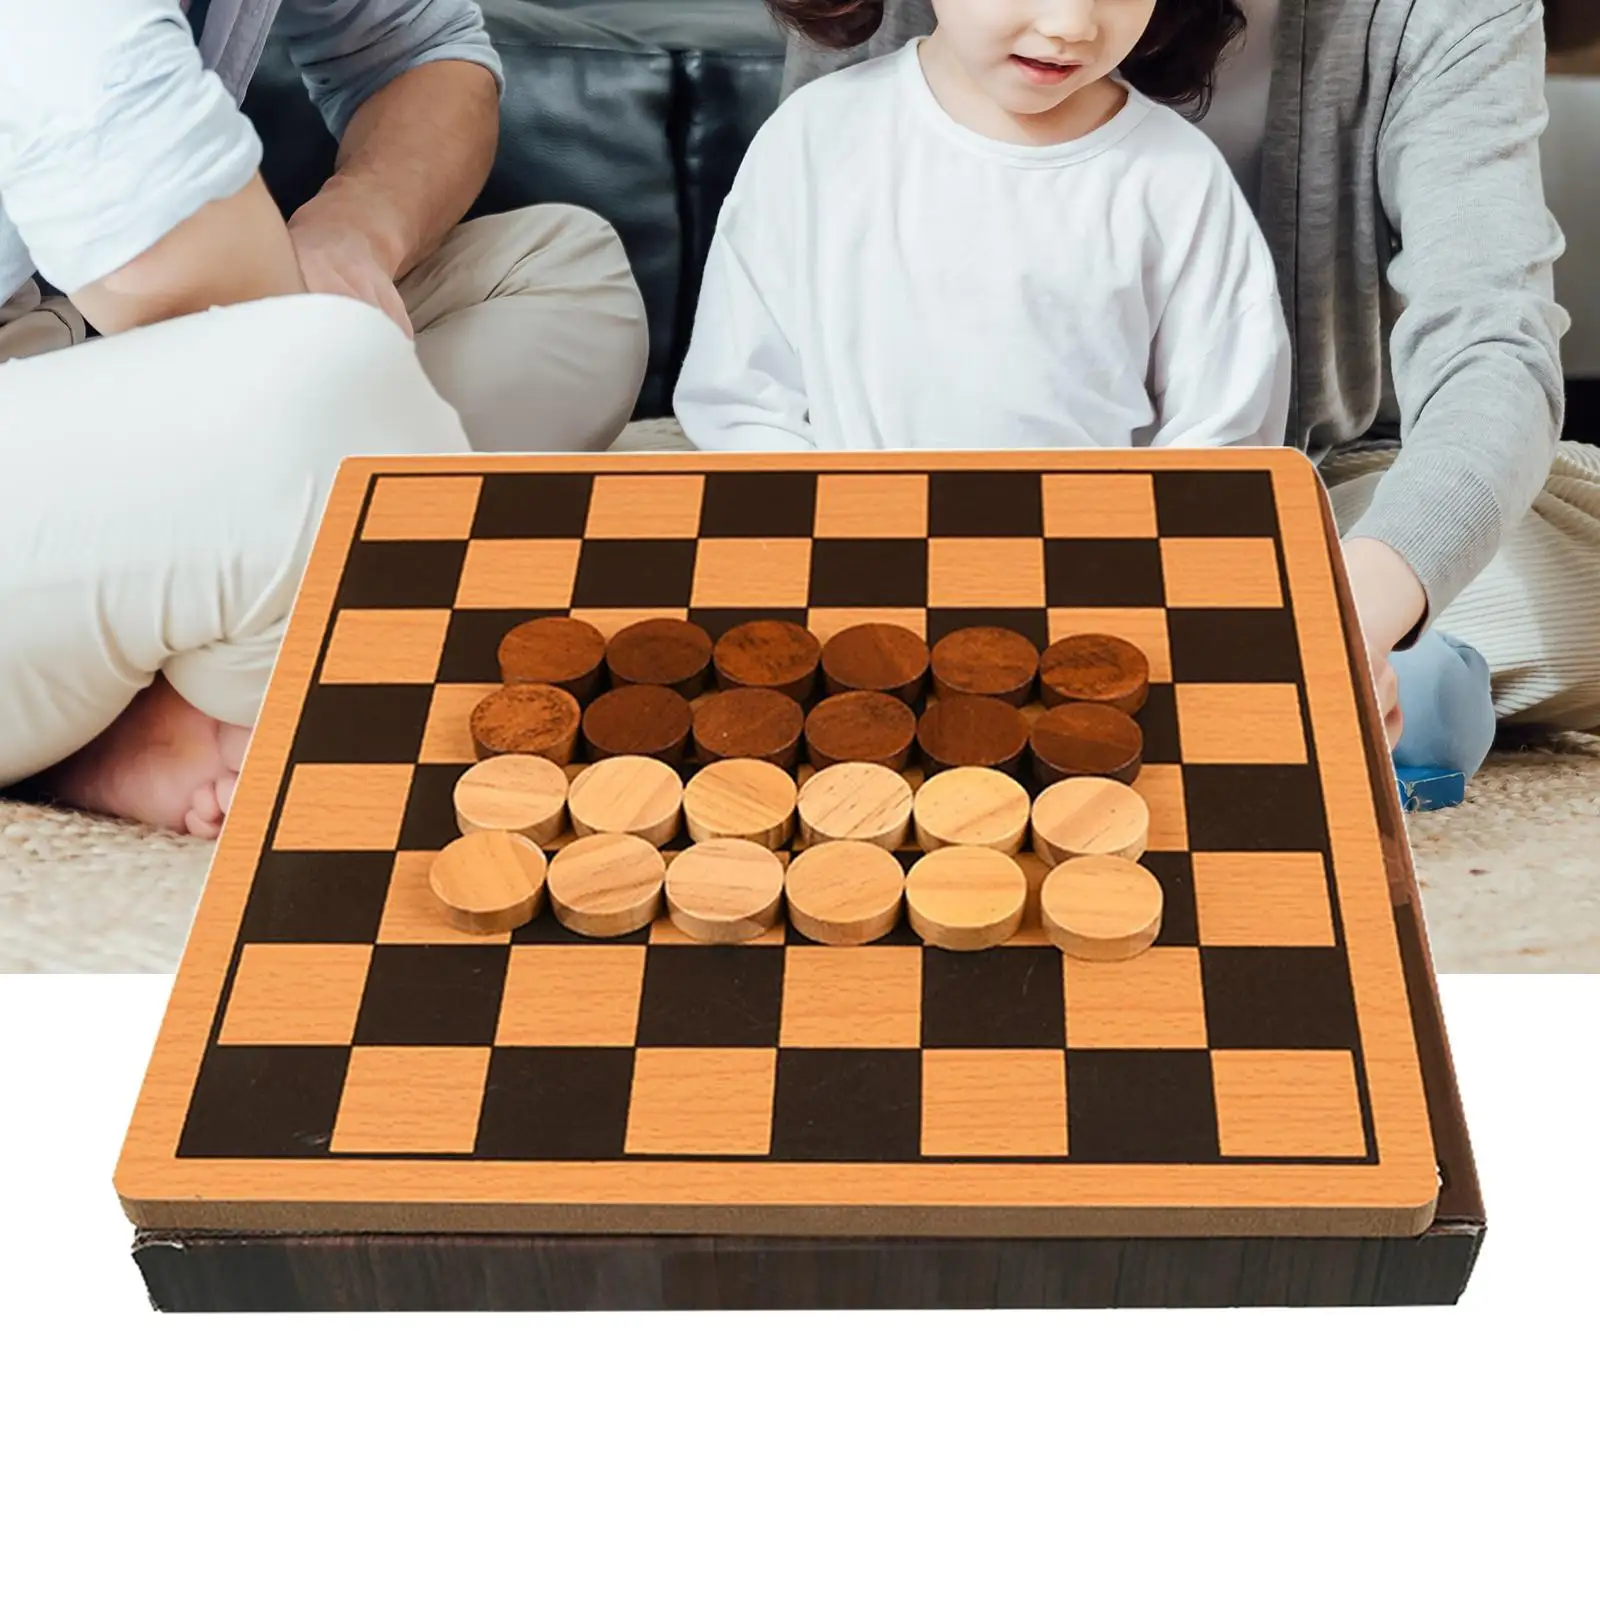 Wooden Chess Game Set Decorative Retro Style Accessories Figurine Entertainment Ornament for Gifts Centerpieces Desktop Travel